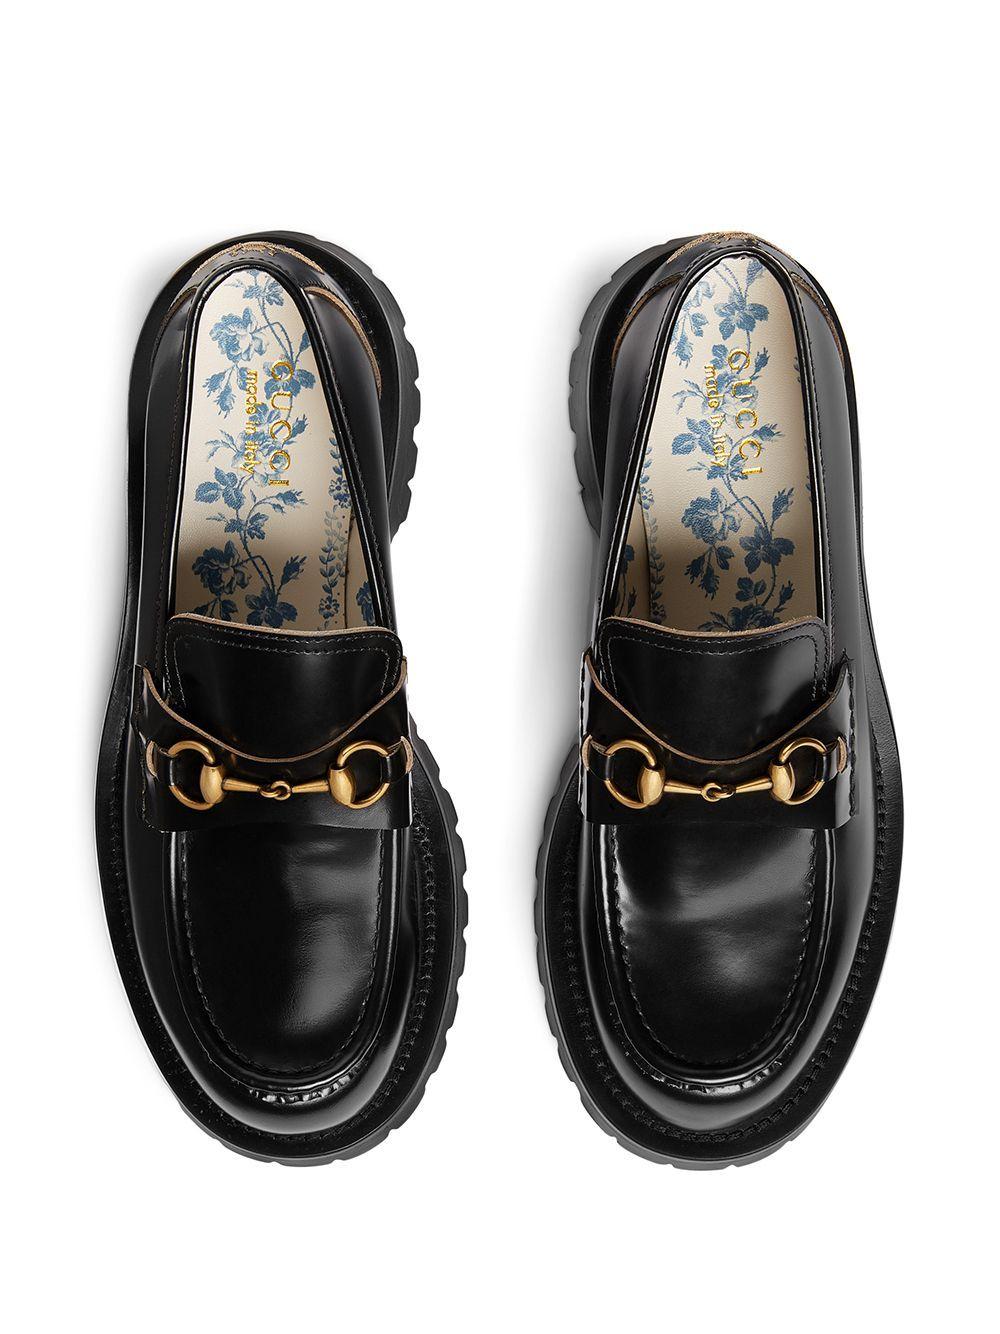 Gucci Leather Loafers With Horsebit And Lug Sole in Black for Men 